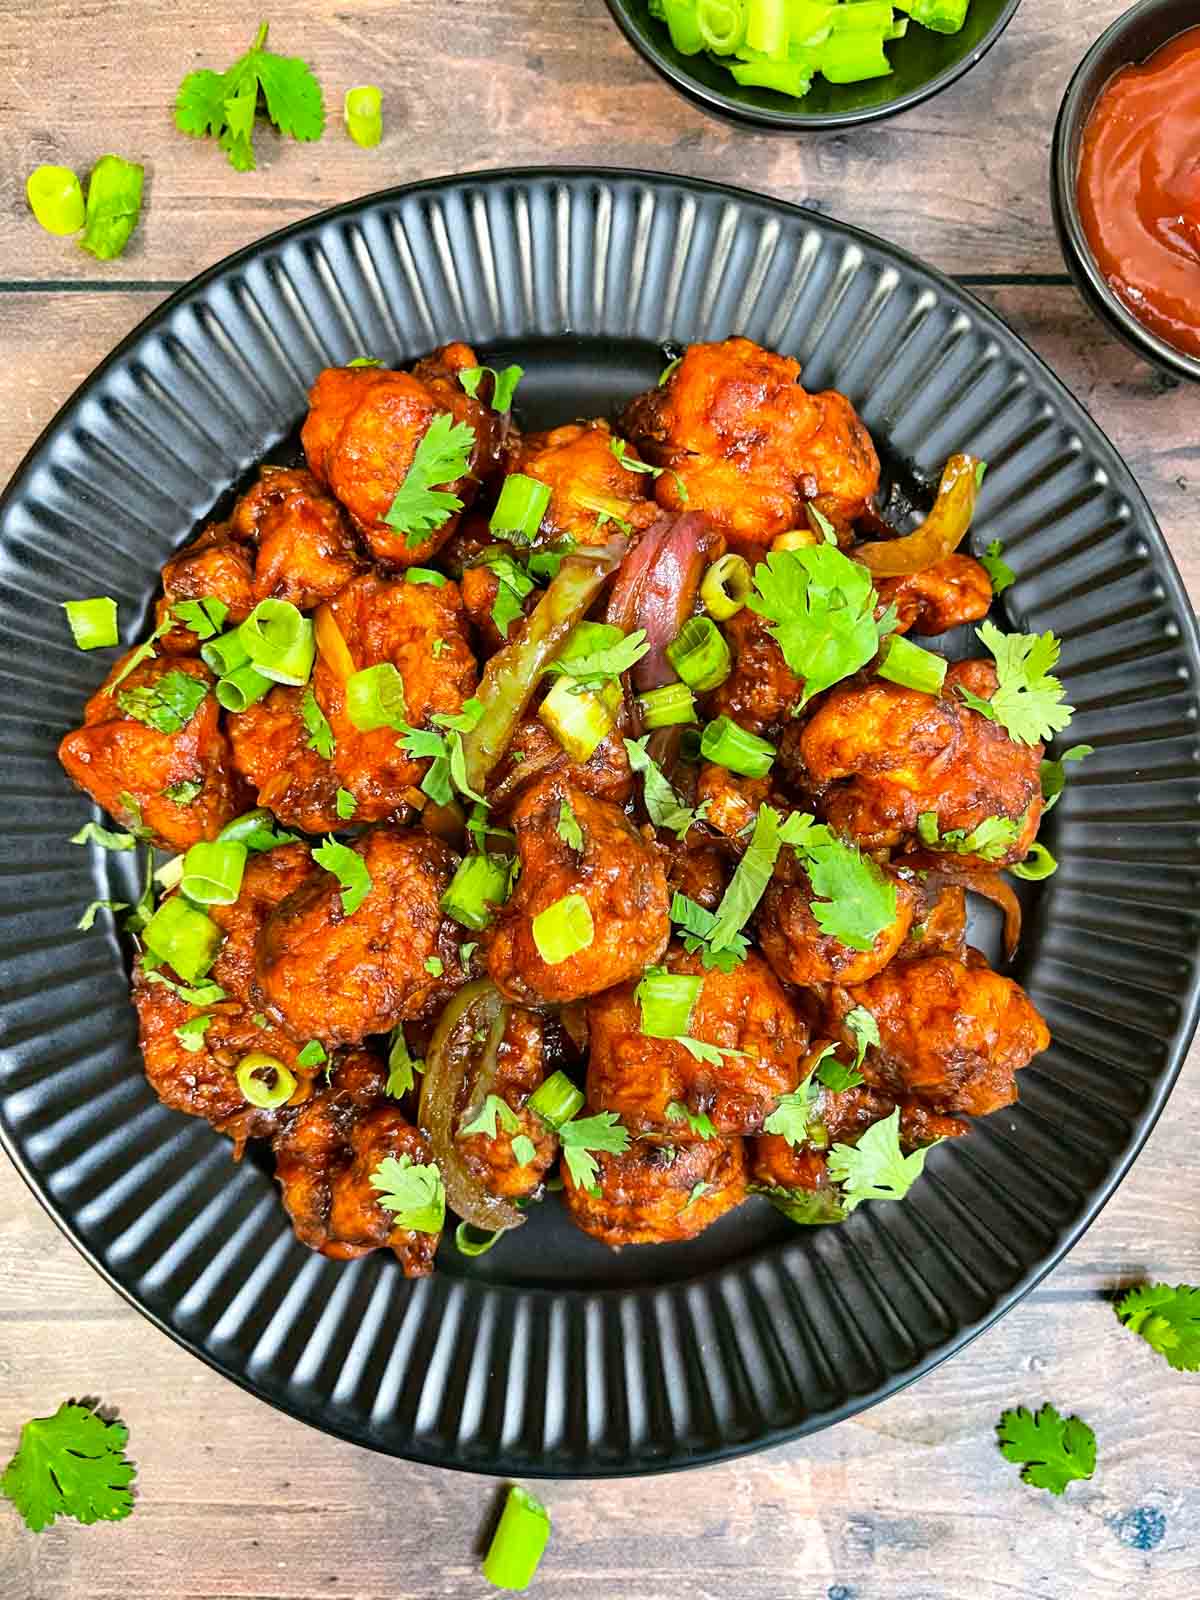 gobi manchurian served on a plate garnished with green onions and cilantro with side of tomato ketchup